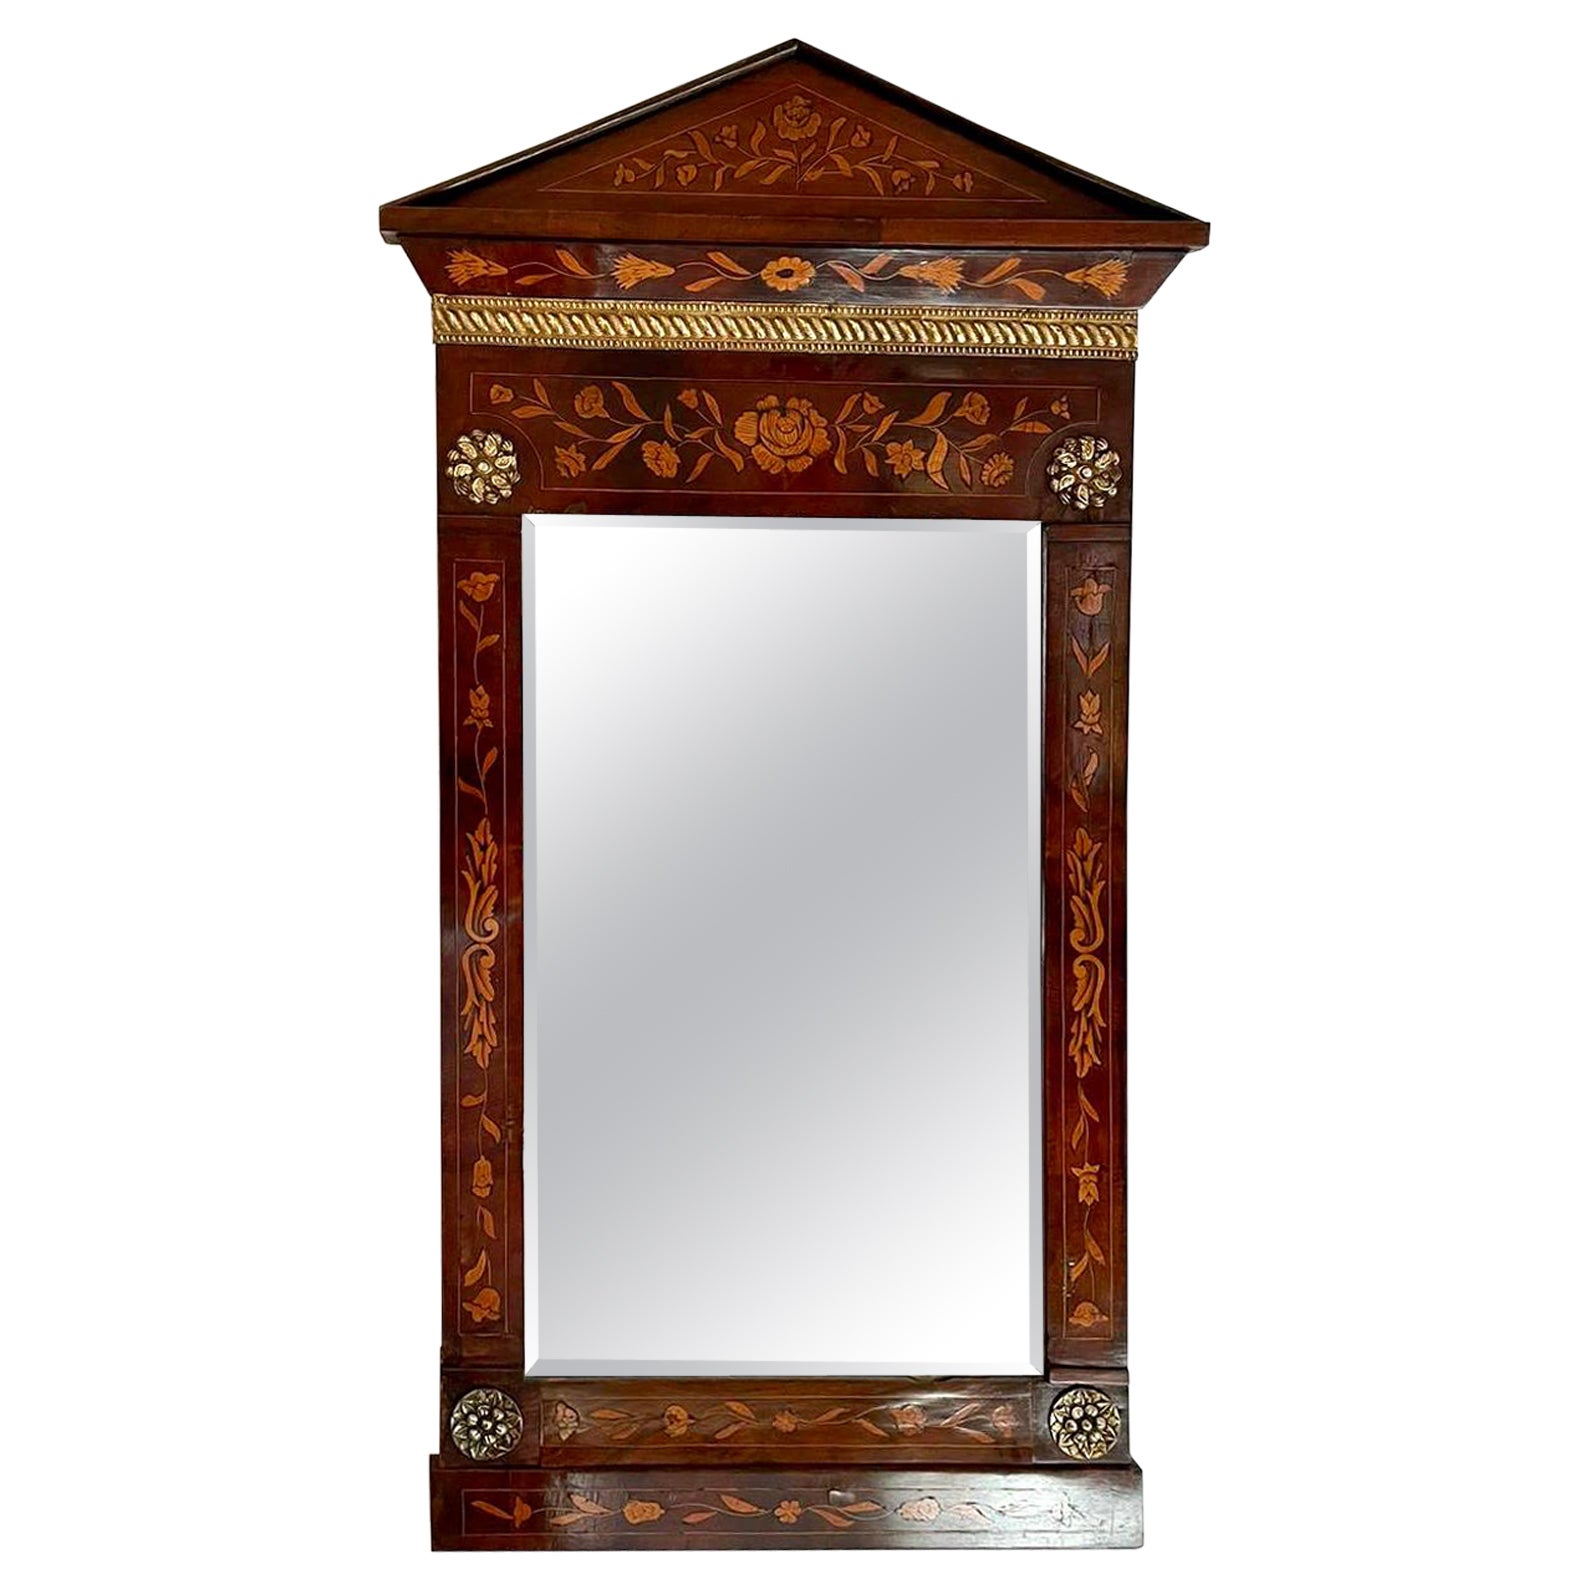 Outstanding Quality Antique Dutch Marquetry Mahogany Inlaid Wall Mirror